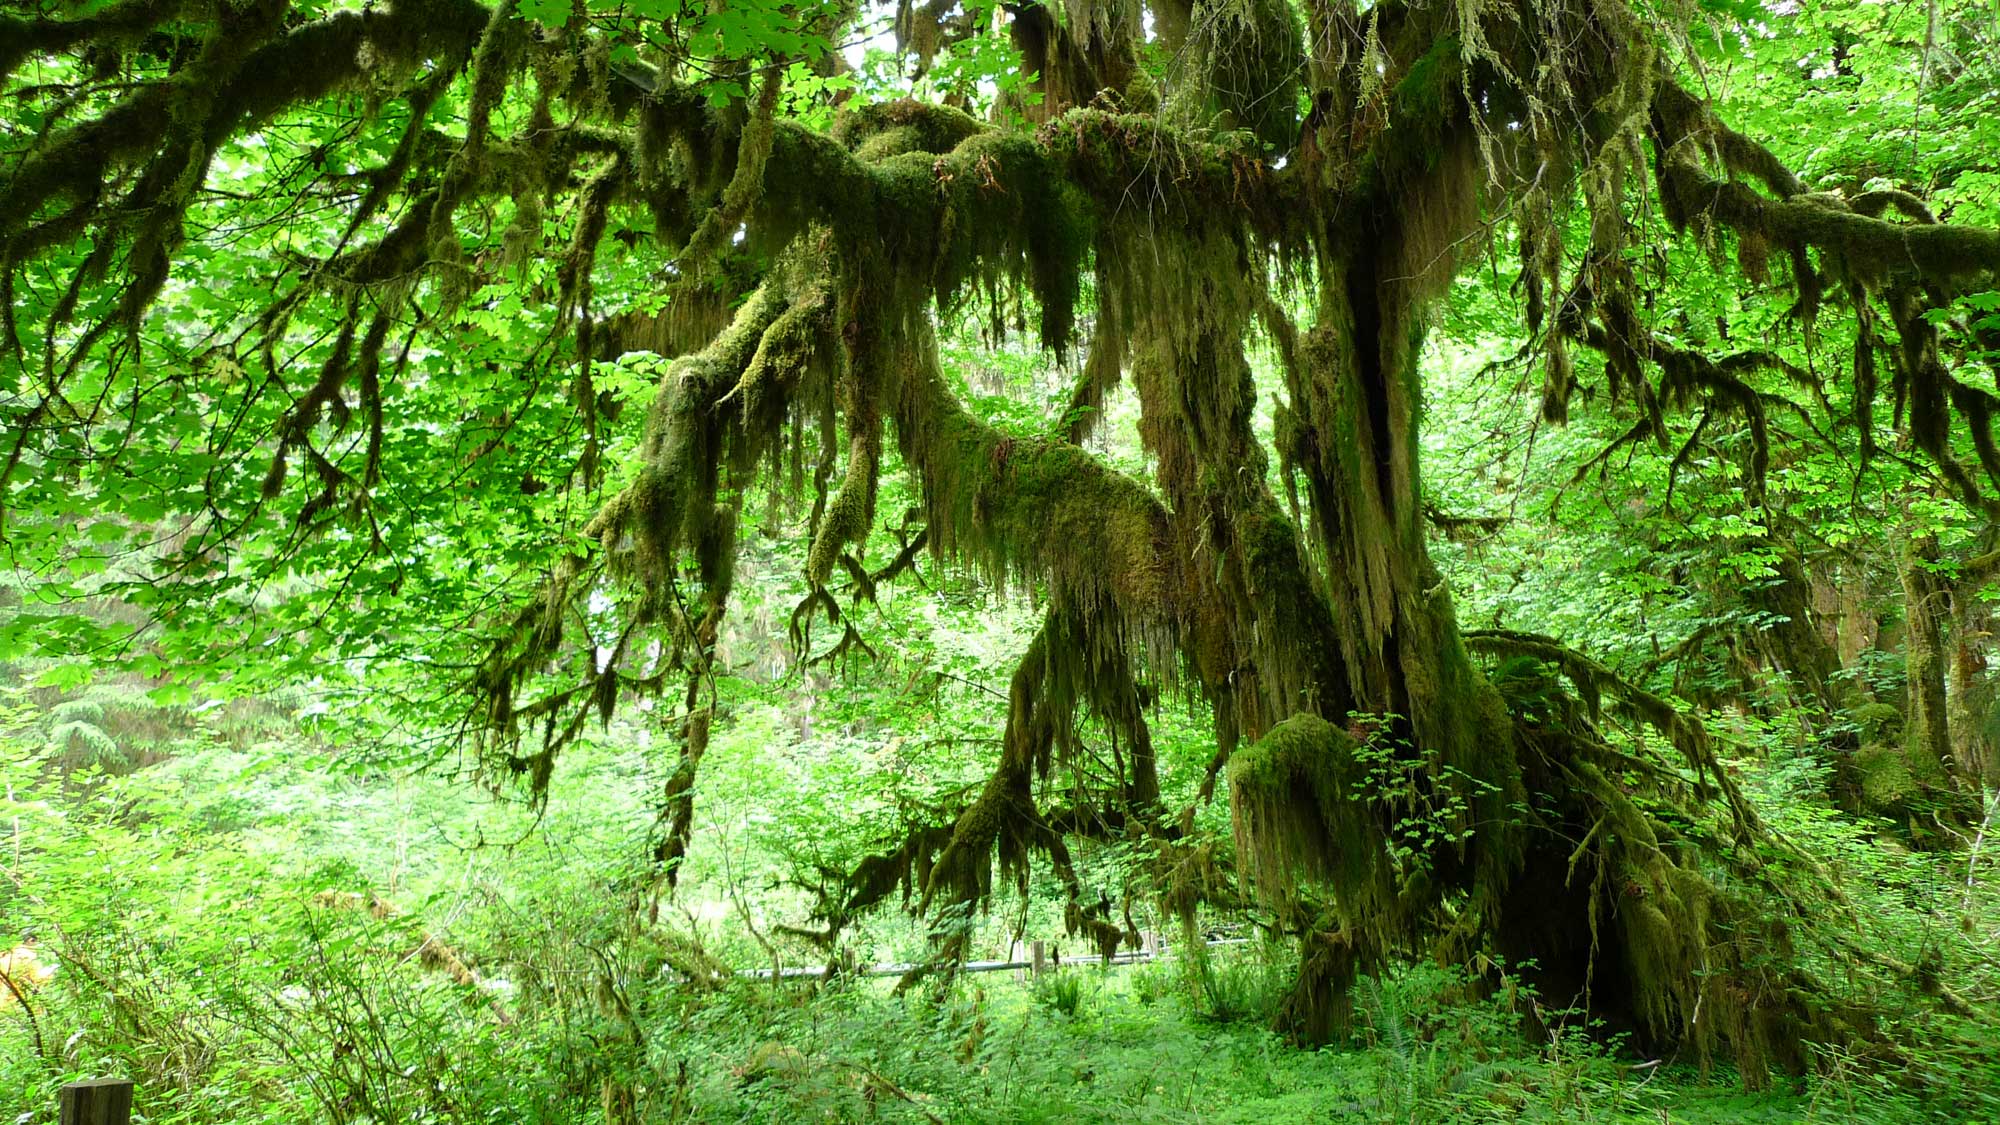 Photograph of a tree in the Hoh Rain Forest, Olympic National Park, Washington. The trunks and branches of the tree are heavily covered with hanging moss.